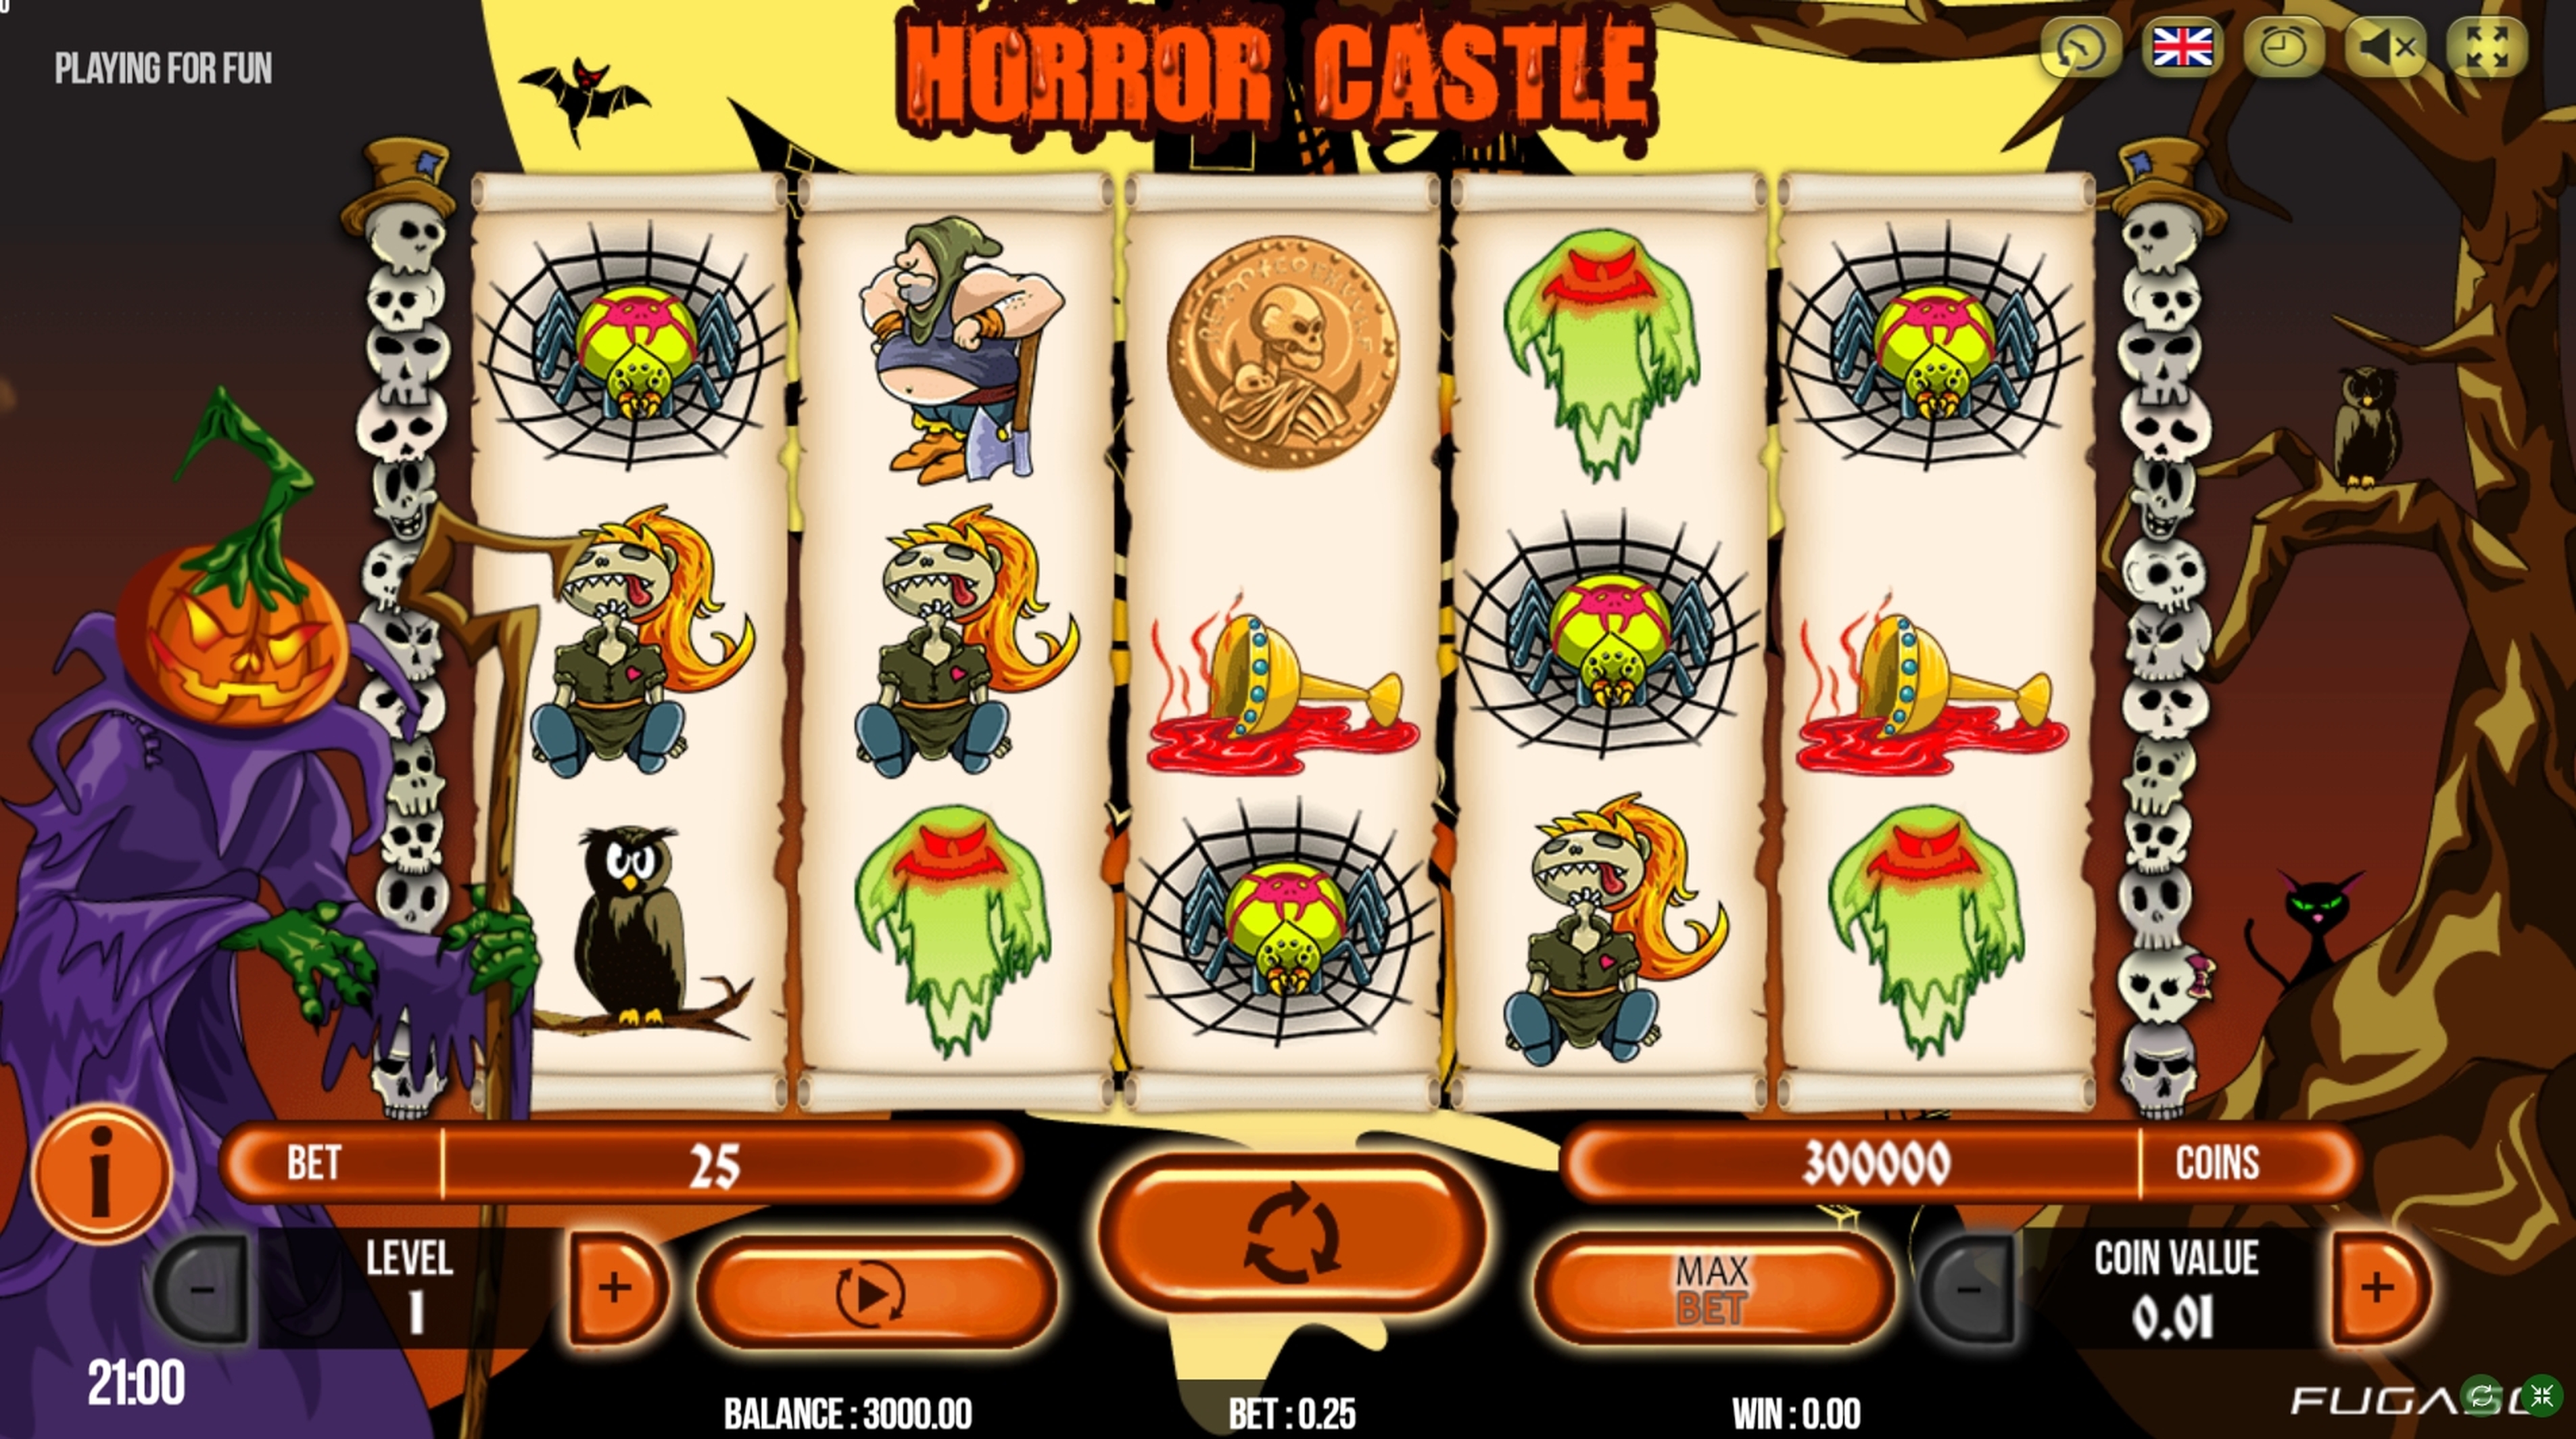 Info of Horror Castle Slot Game by Fugaso